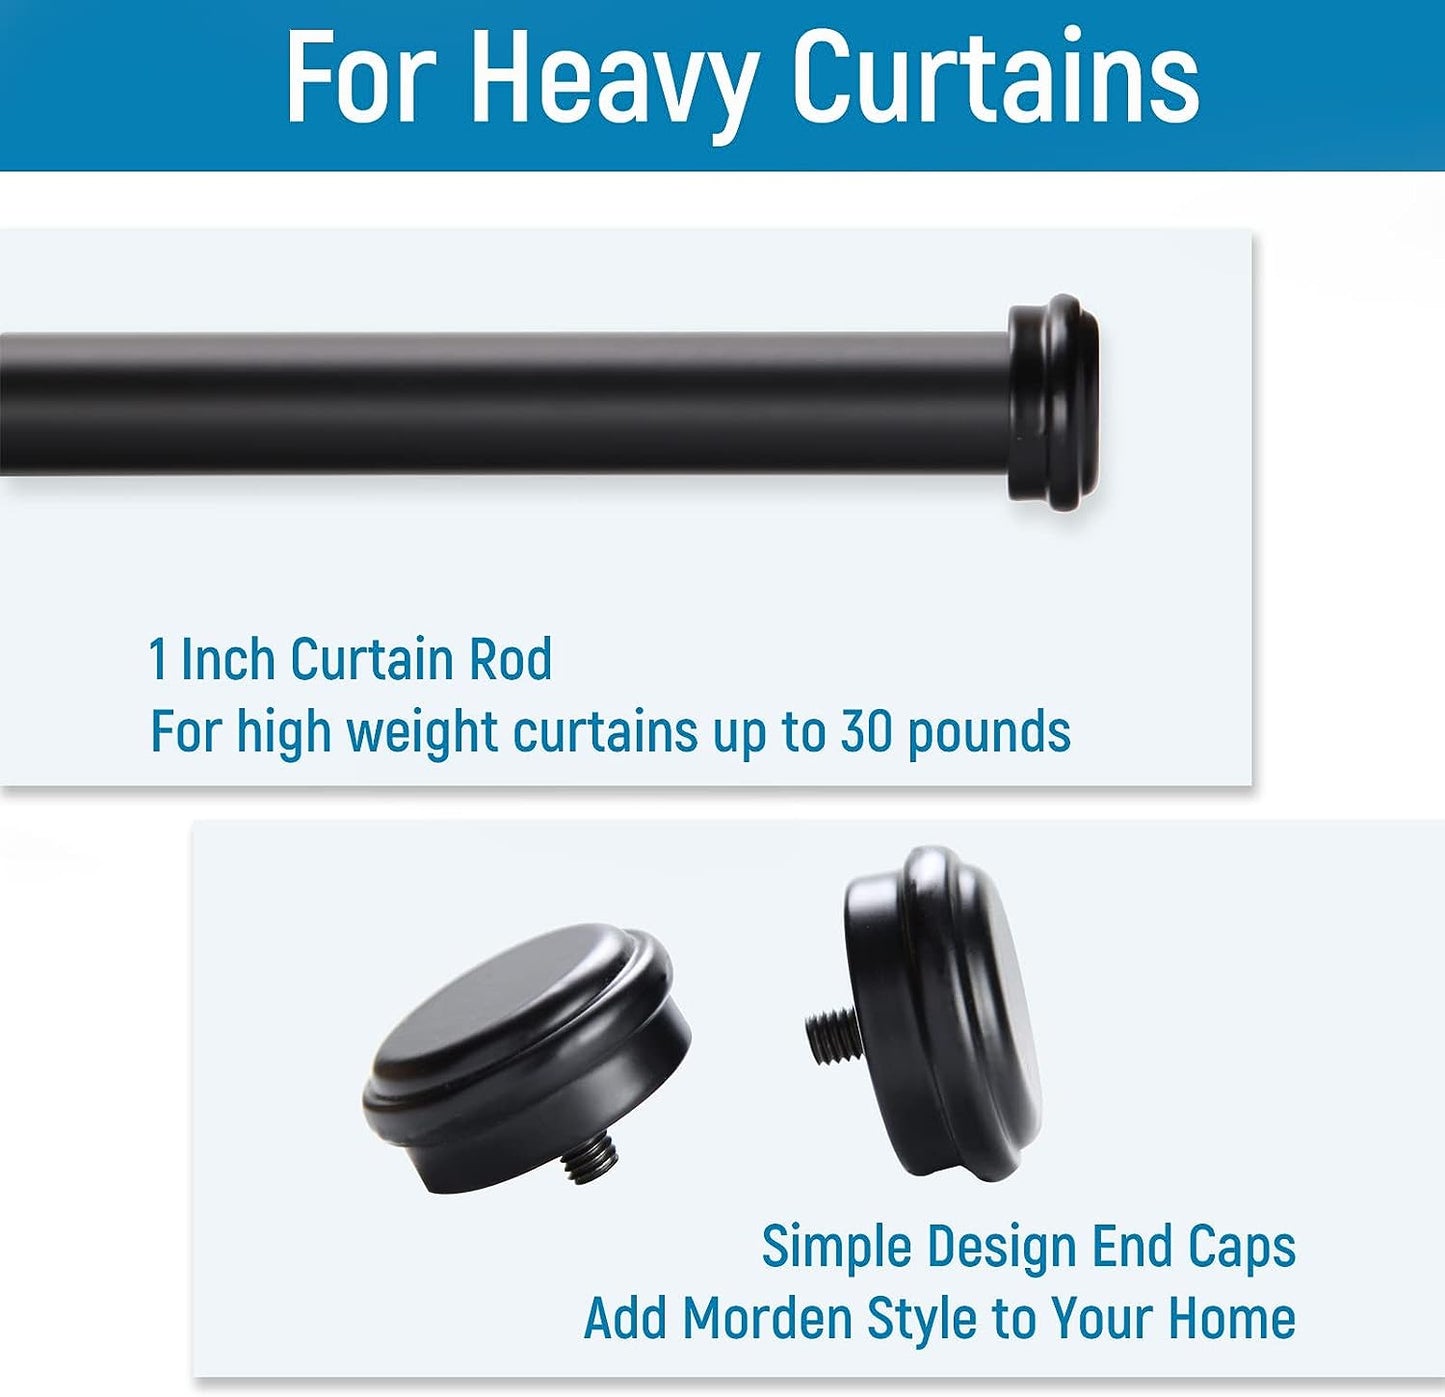 1 Inch Curtain Rods, Black Curtain Rods, Curtain Rods for Windows 28 to 48, Outdoor Curtain Rod for Patio, Wall Mount & Ceiling Mount, Adjustable Curtain Rod, Room Divider Curtain Rod (28” to 48”)